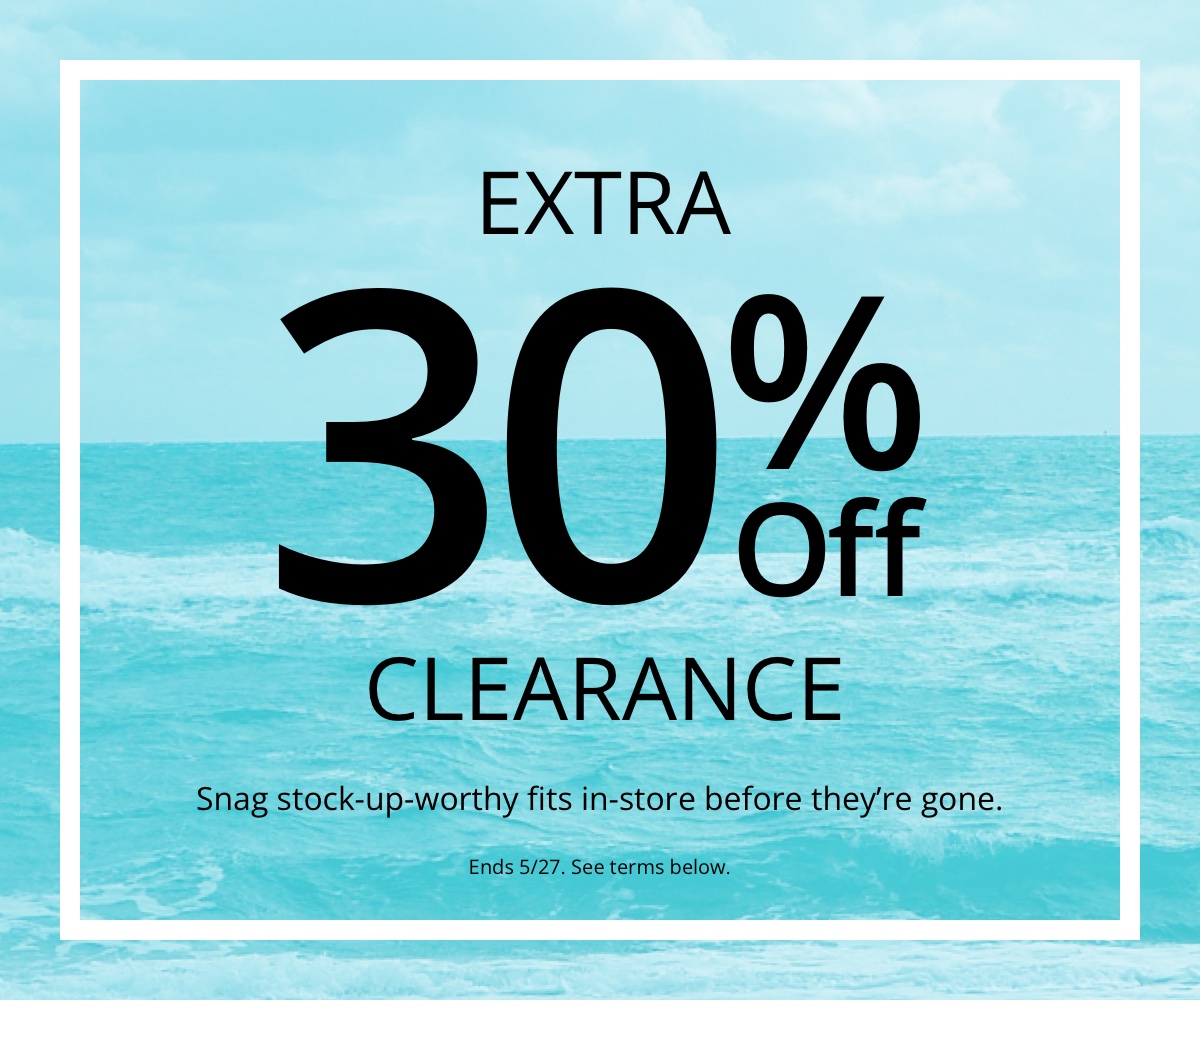 Extra| 30% Off|Clearance|Snag stock-up-worthy fits in-store before theyre gone. |Ends 5/27. See terms below.